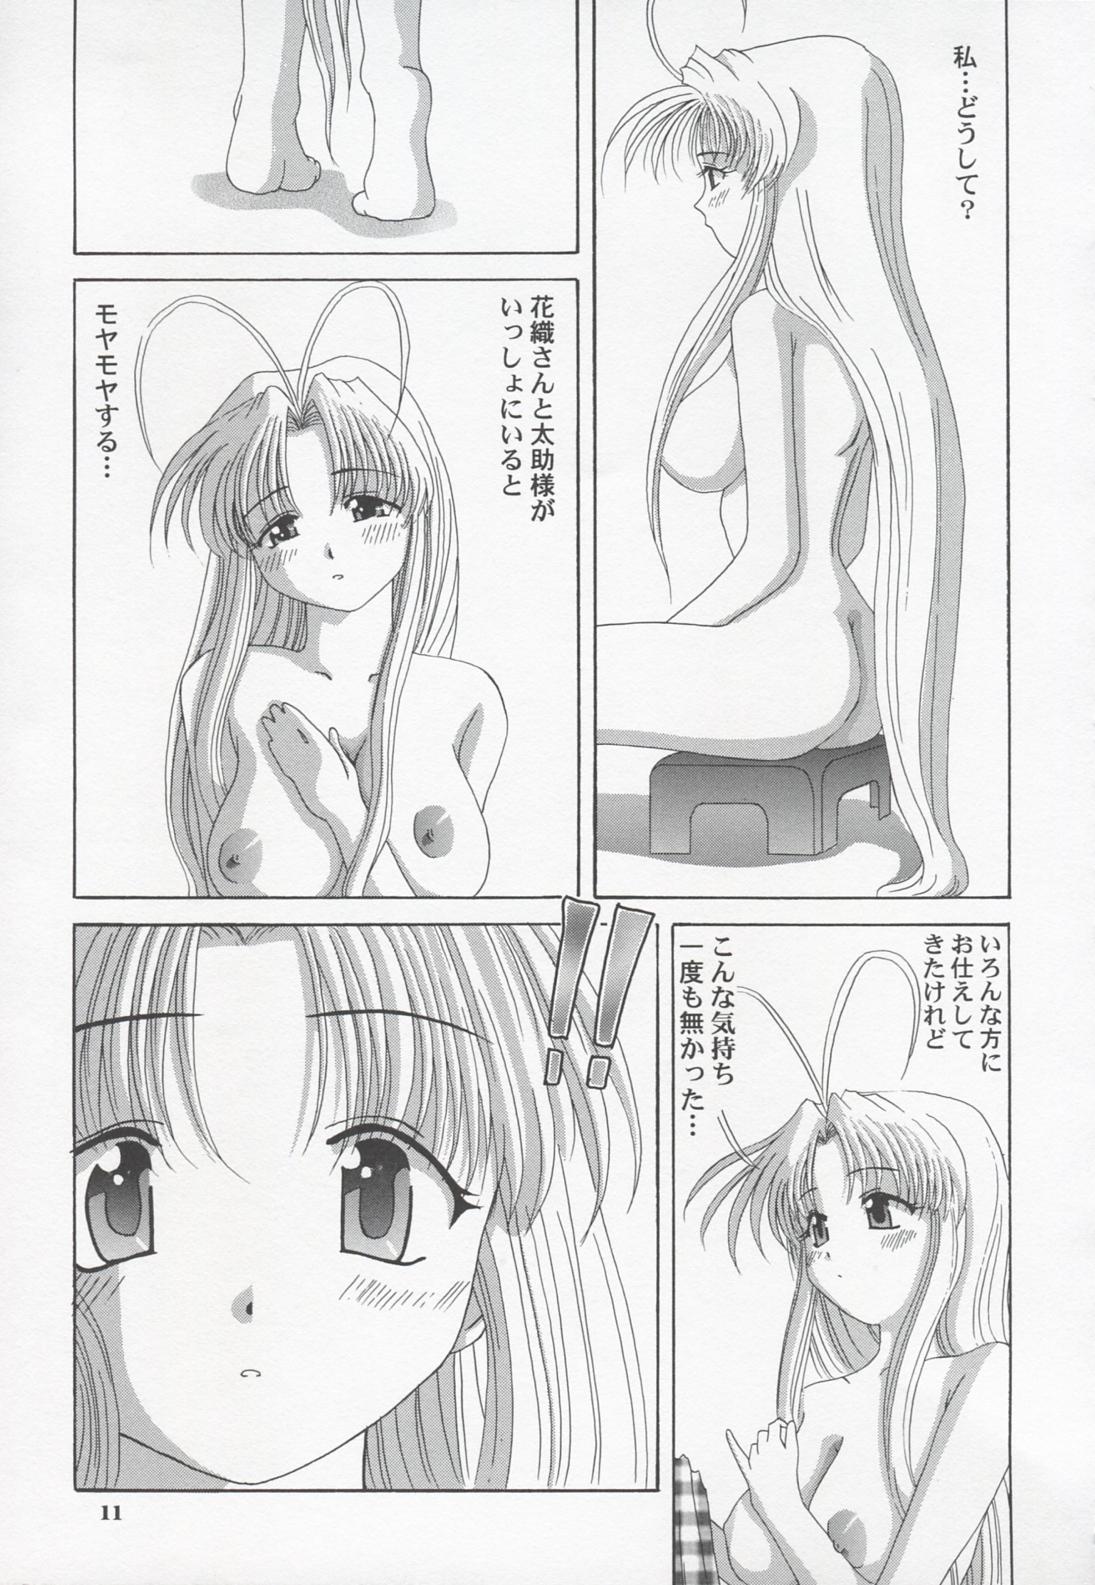 Pigtails Shao ni Omakase!! - Mamotte shugogetten Reality Porn - Page 10